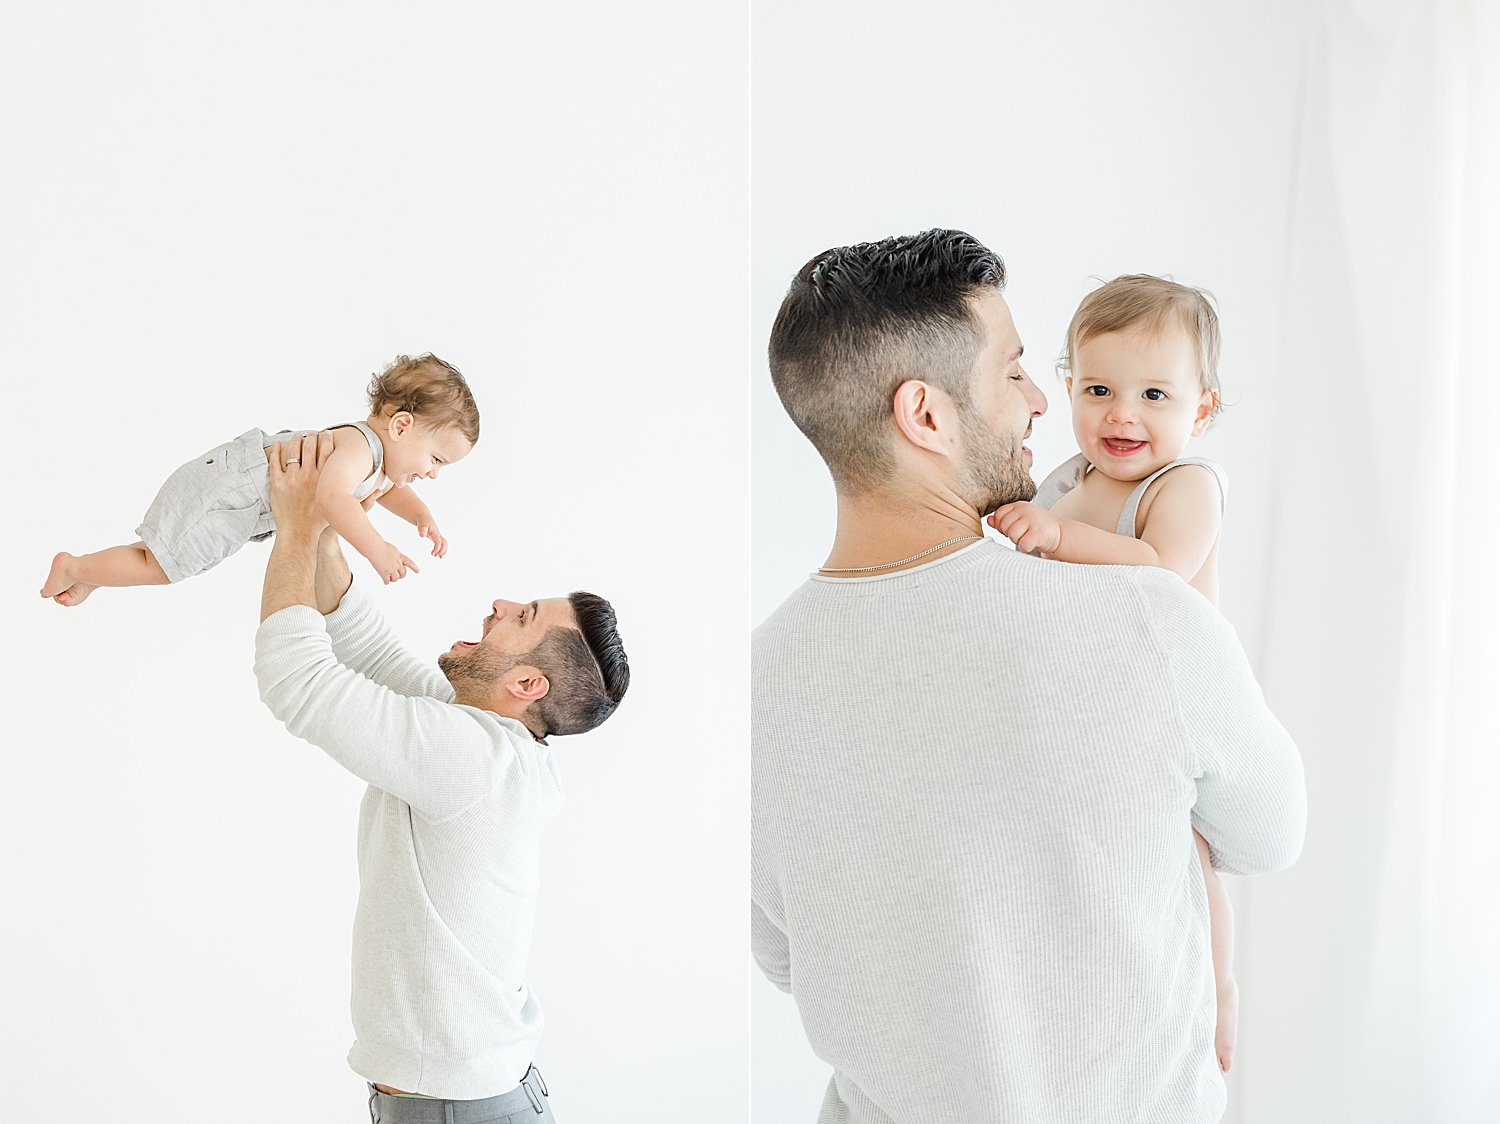 Why You Should Hire a Photographer for Your Baby's First Year | Dad with son during first birthday photoshoot | Kristin Wood Photography